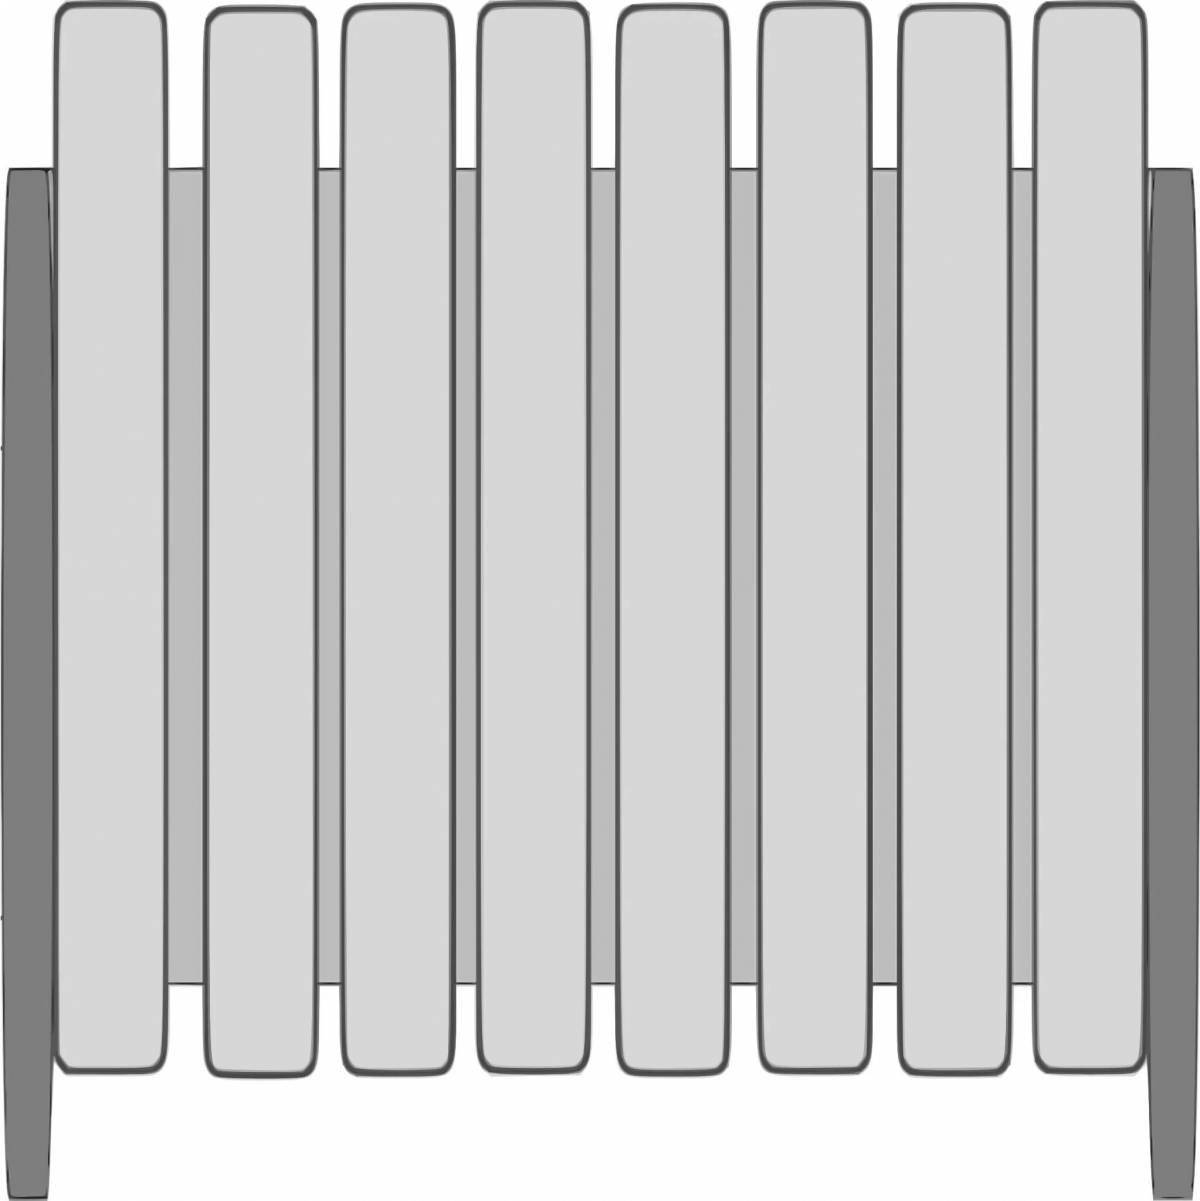 Battery bright coloring page